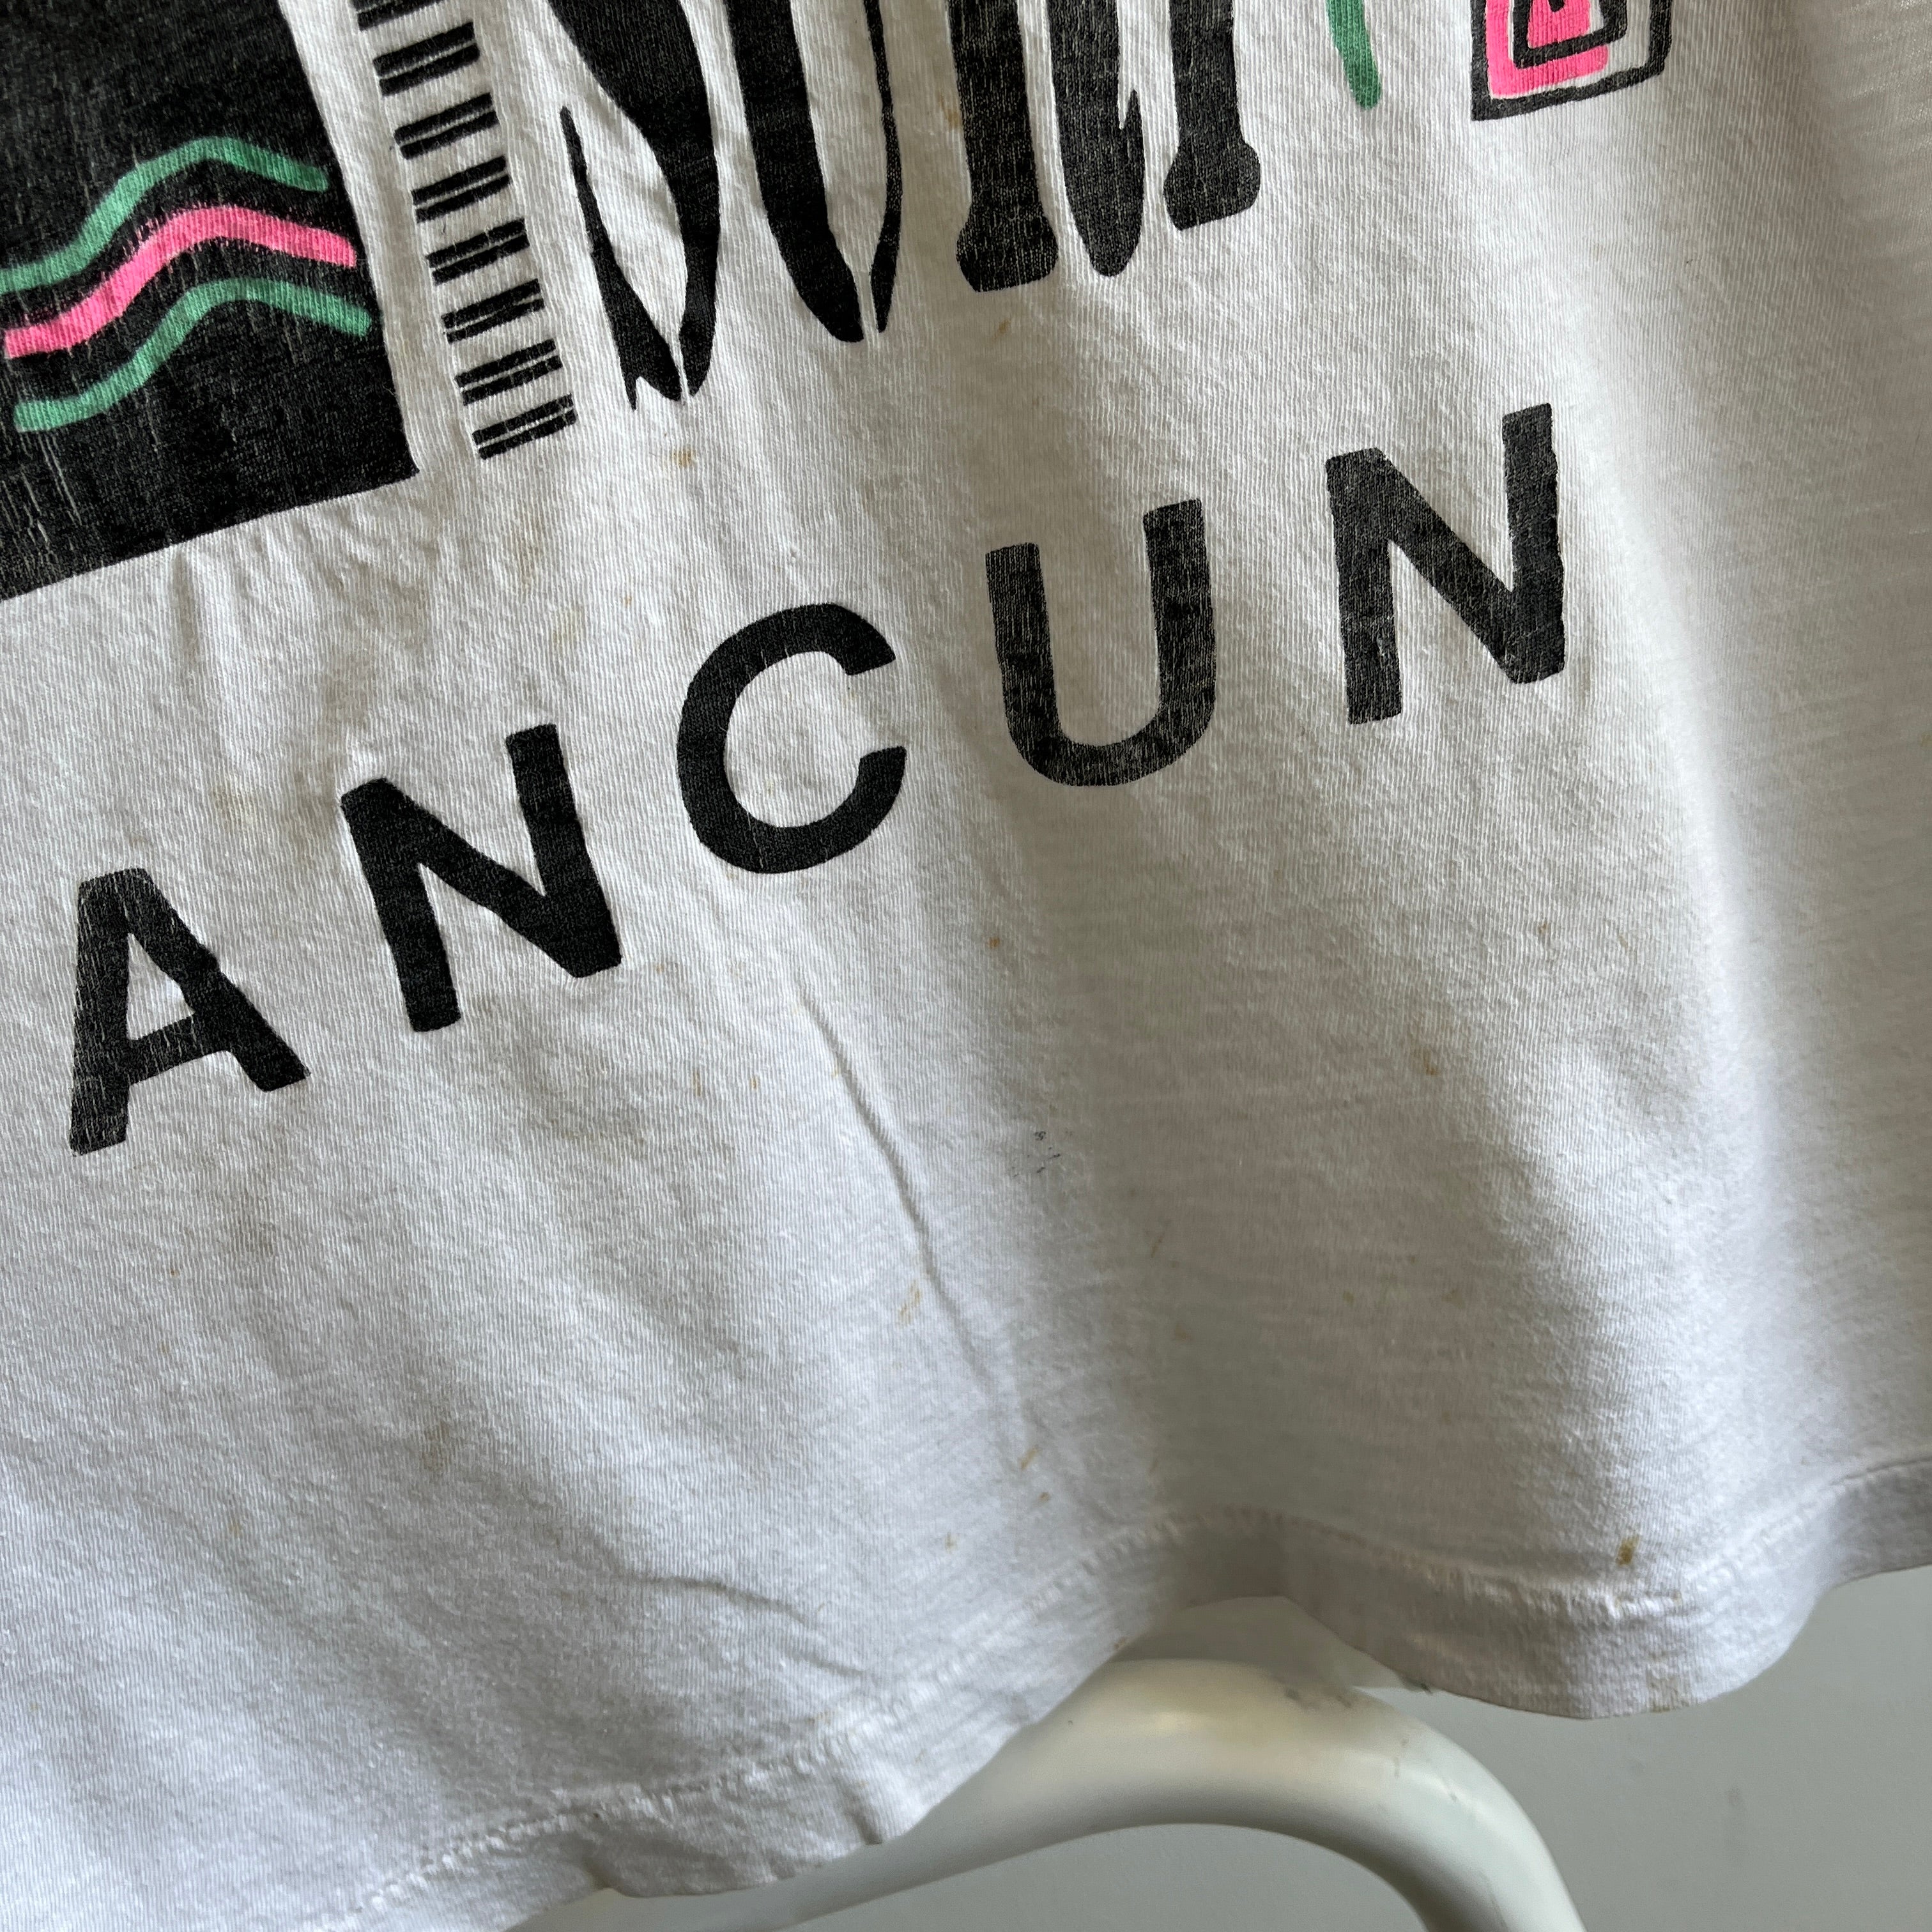 1980s Cancun Soft and Slouchy Tourist T-Shirt